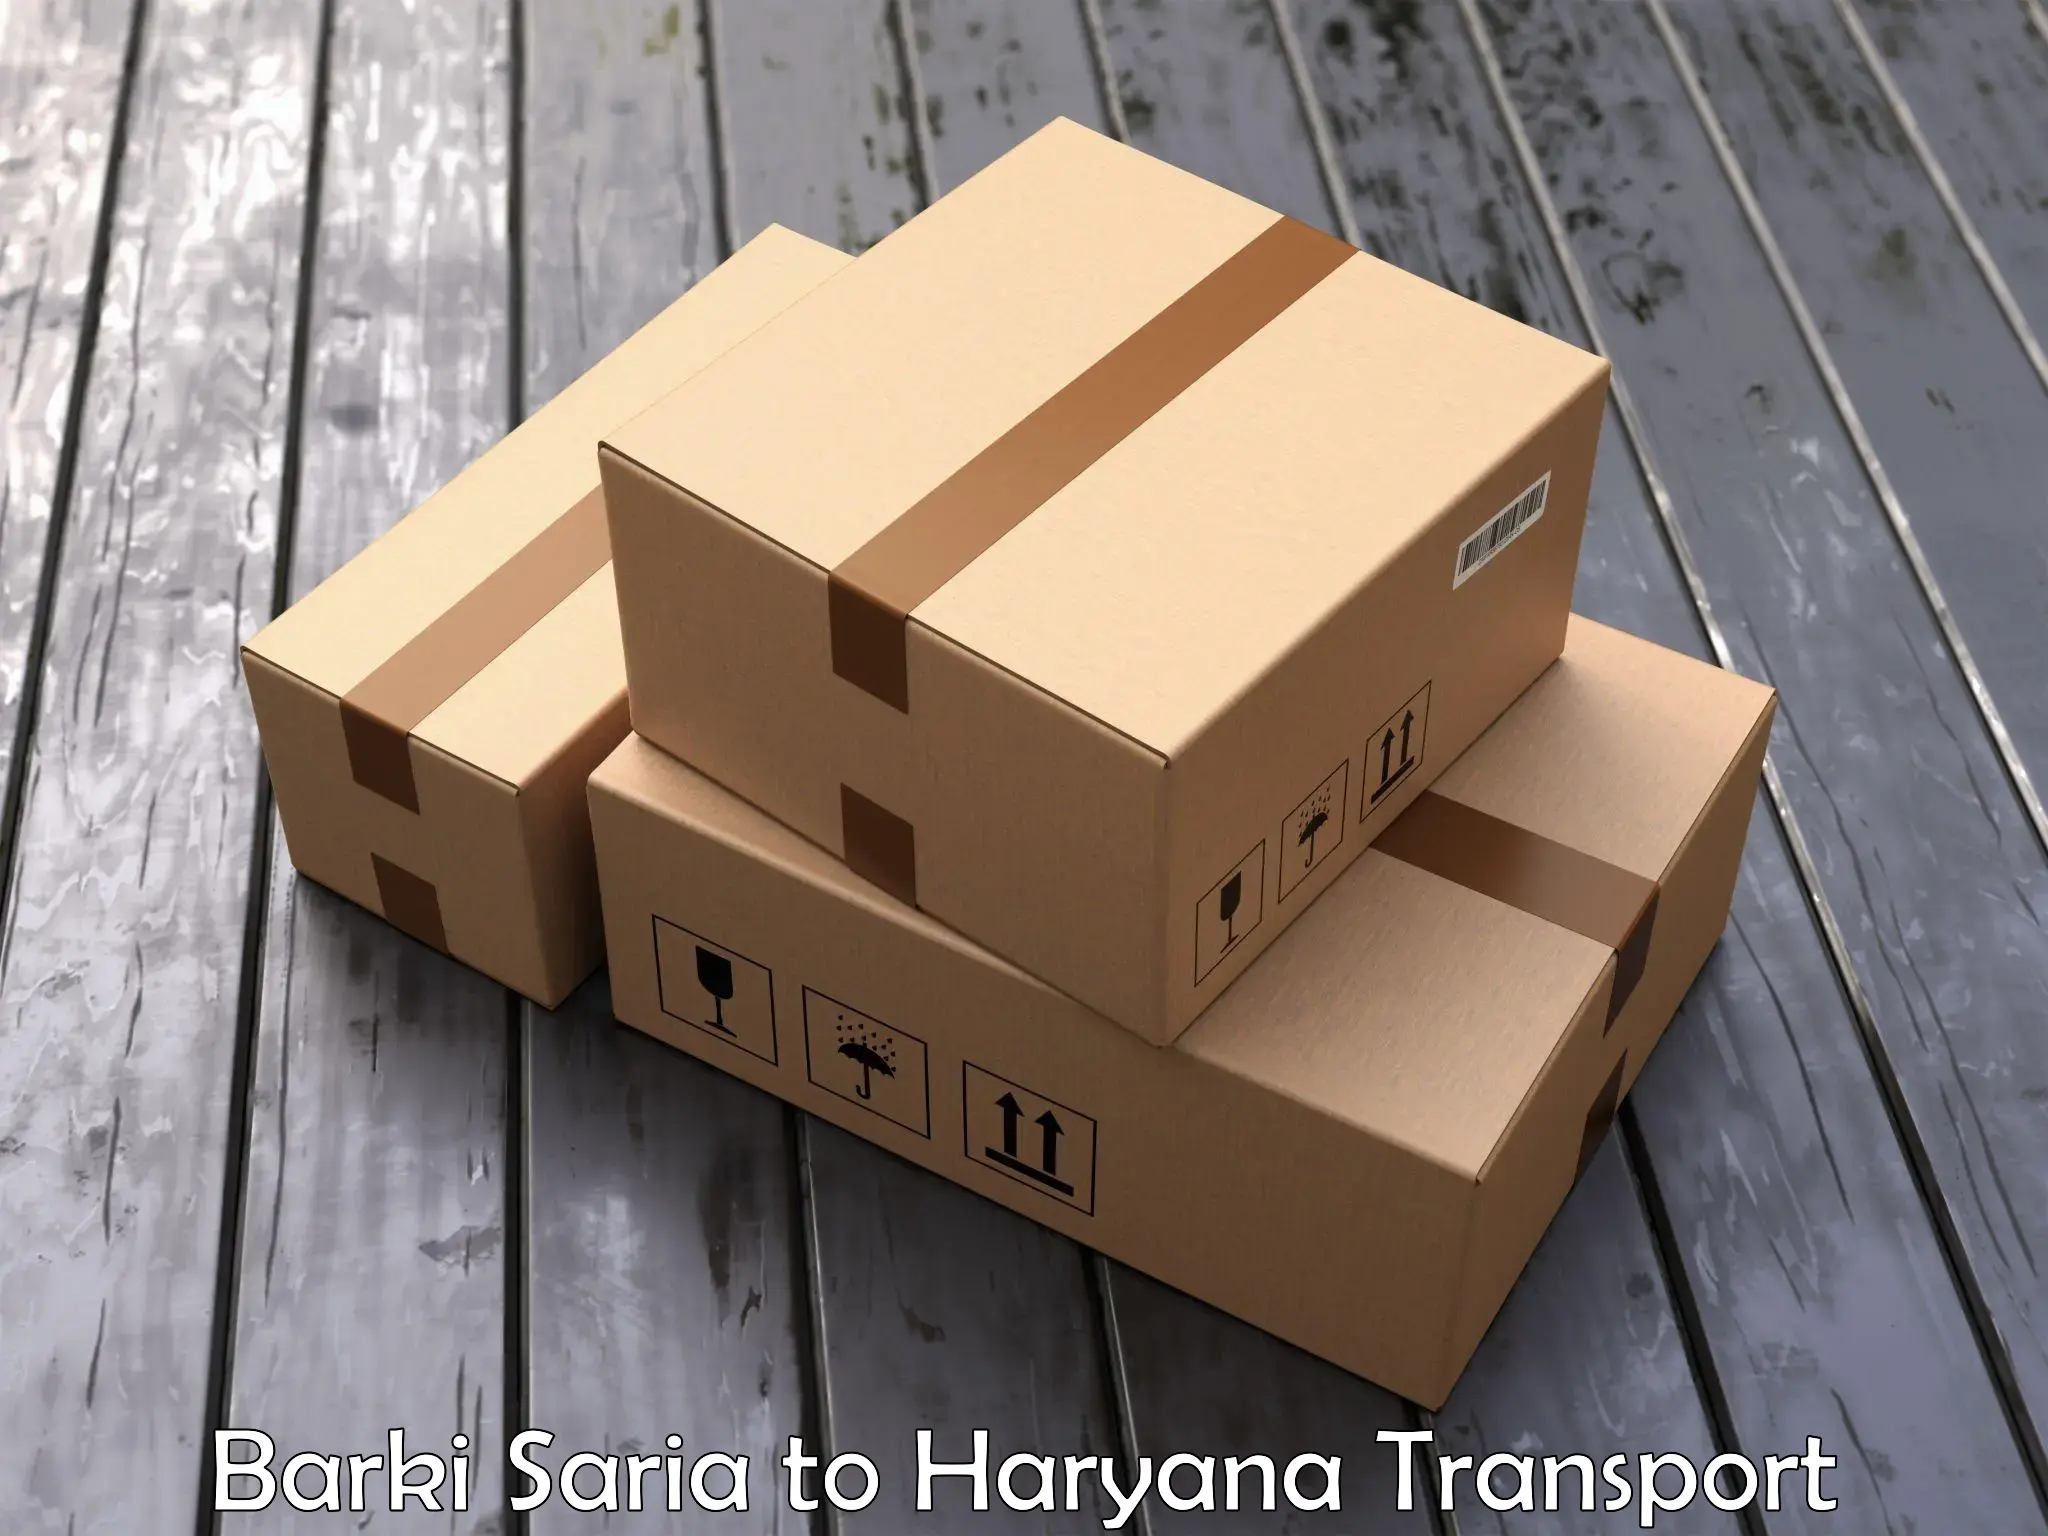 Best transport services in India Barki Saria to Odhan